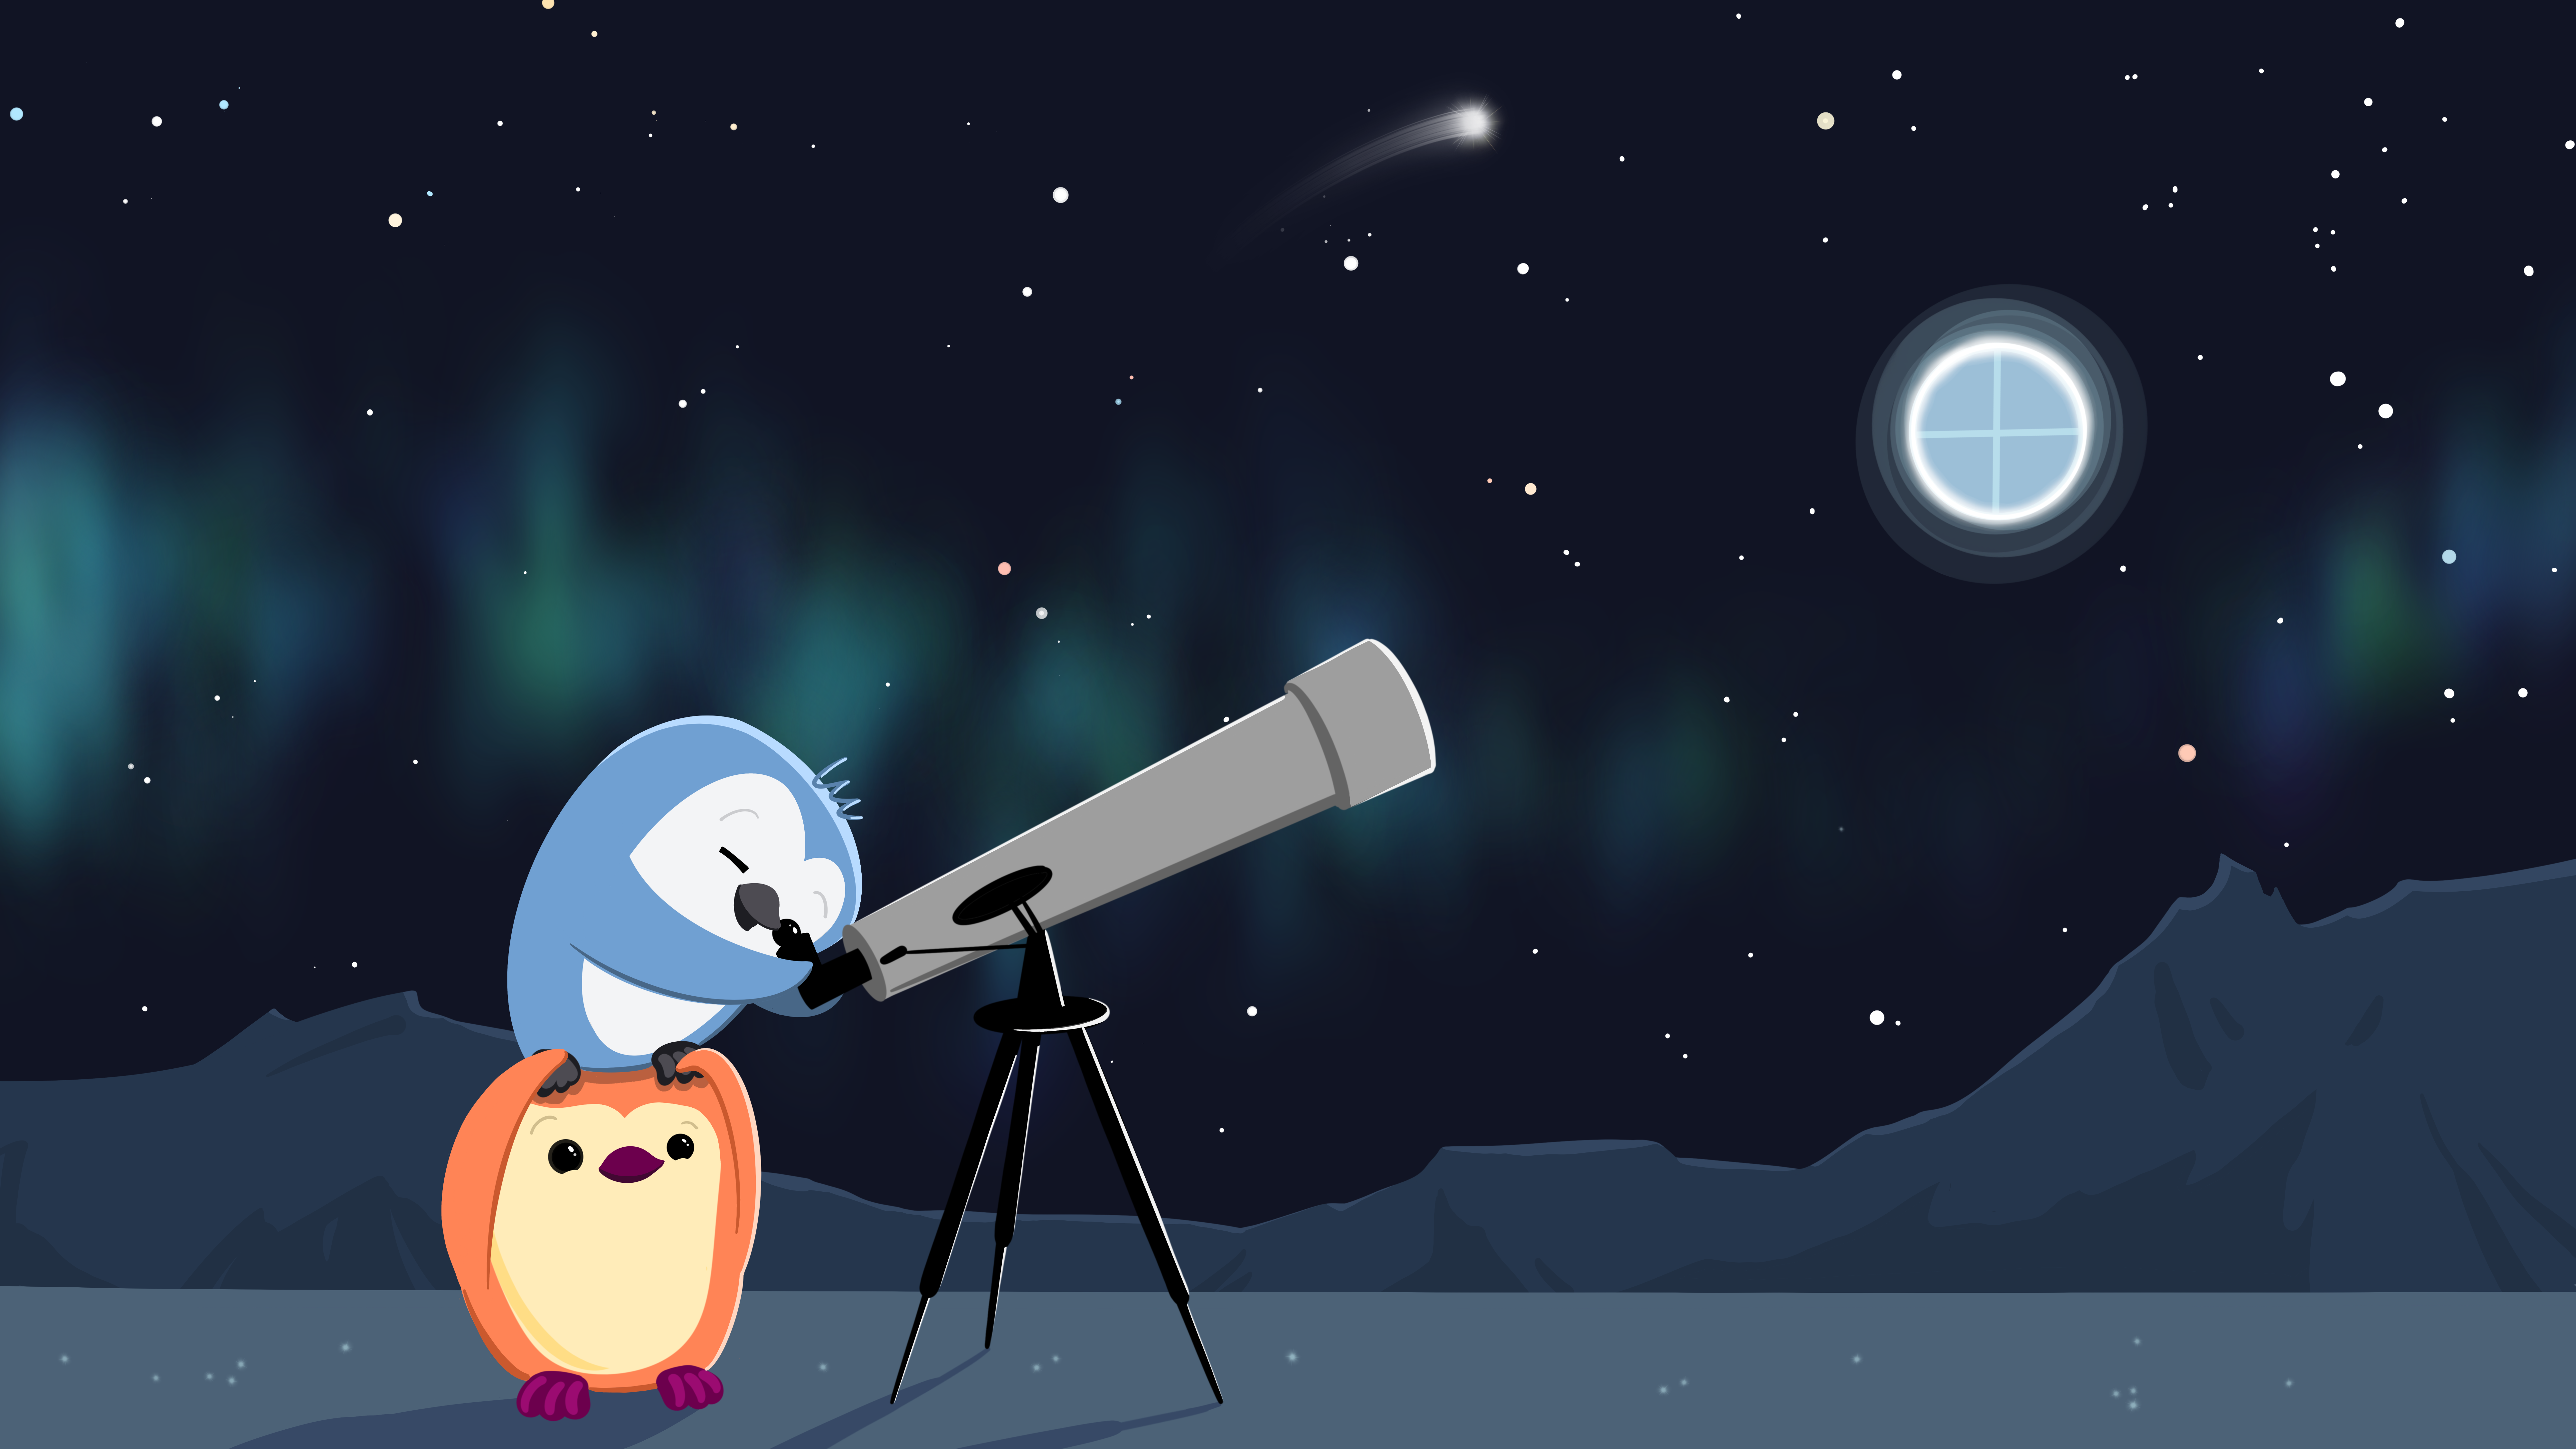 One penguin standing on another penguin's shoulders in a snowscape, looking through a telescope at a Quarto logo 'moon' in the night sky.